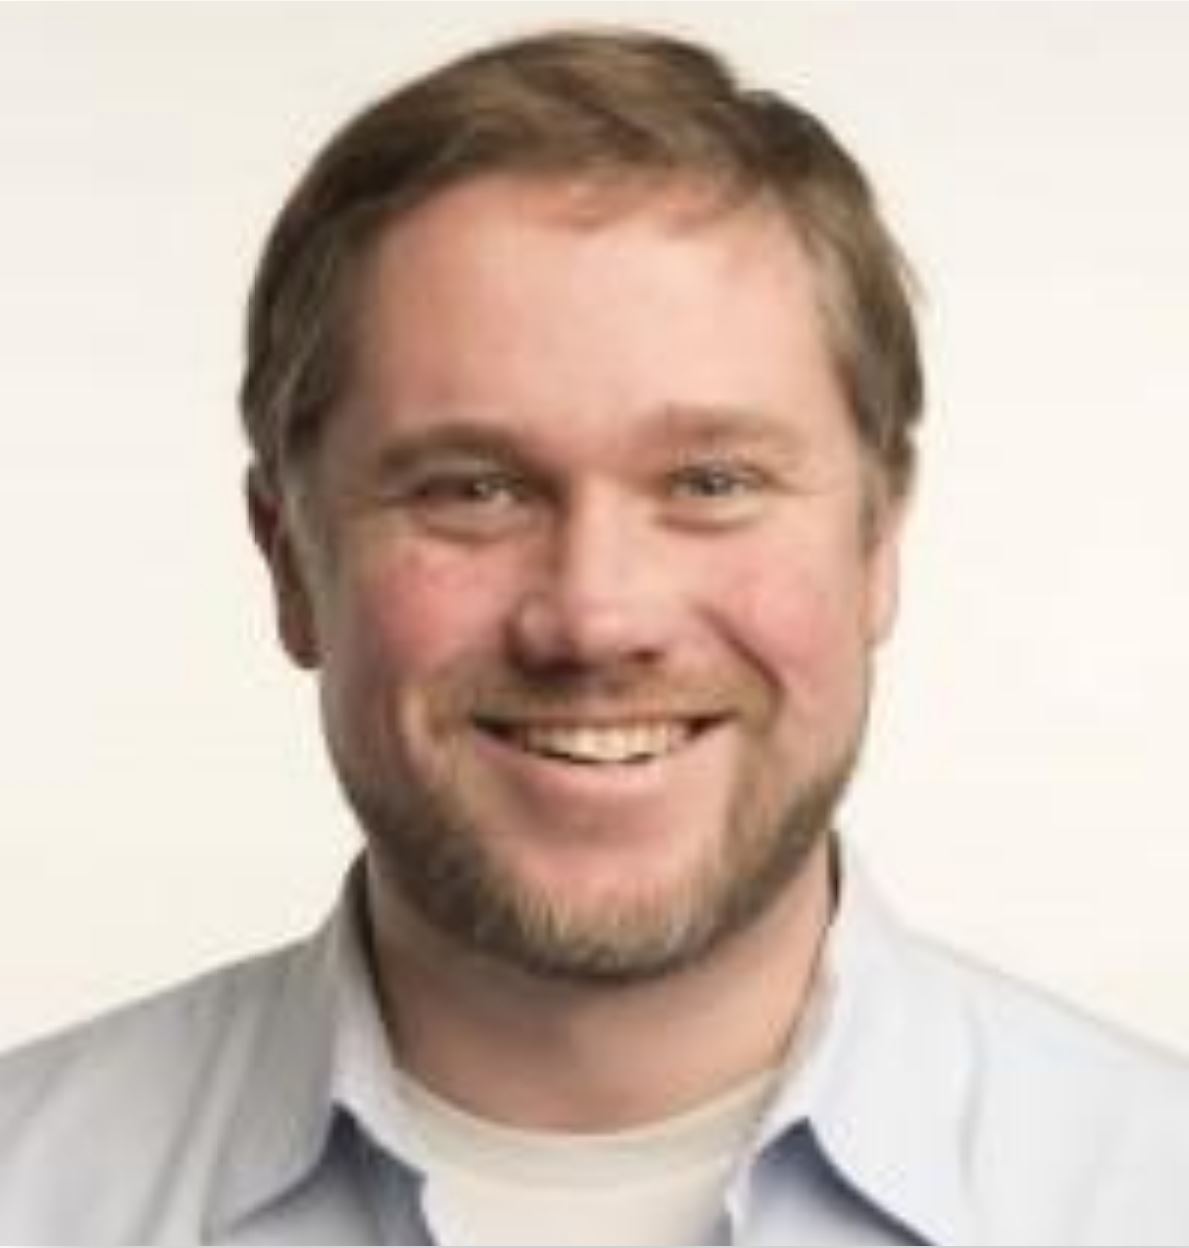 Headshot of Nathan Lundblad smiling in a light gray button-up shirt.